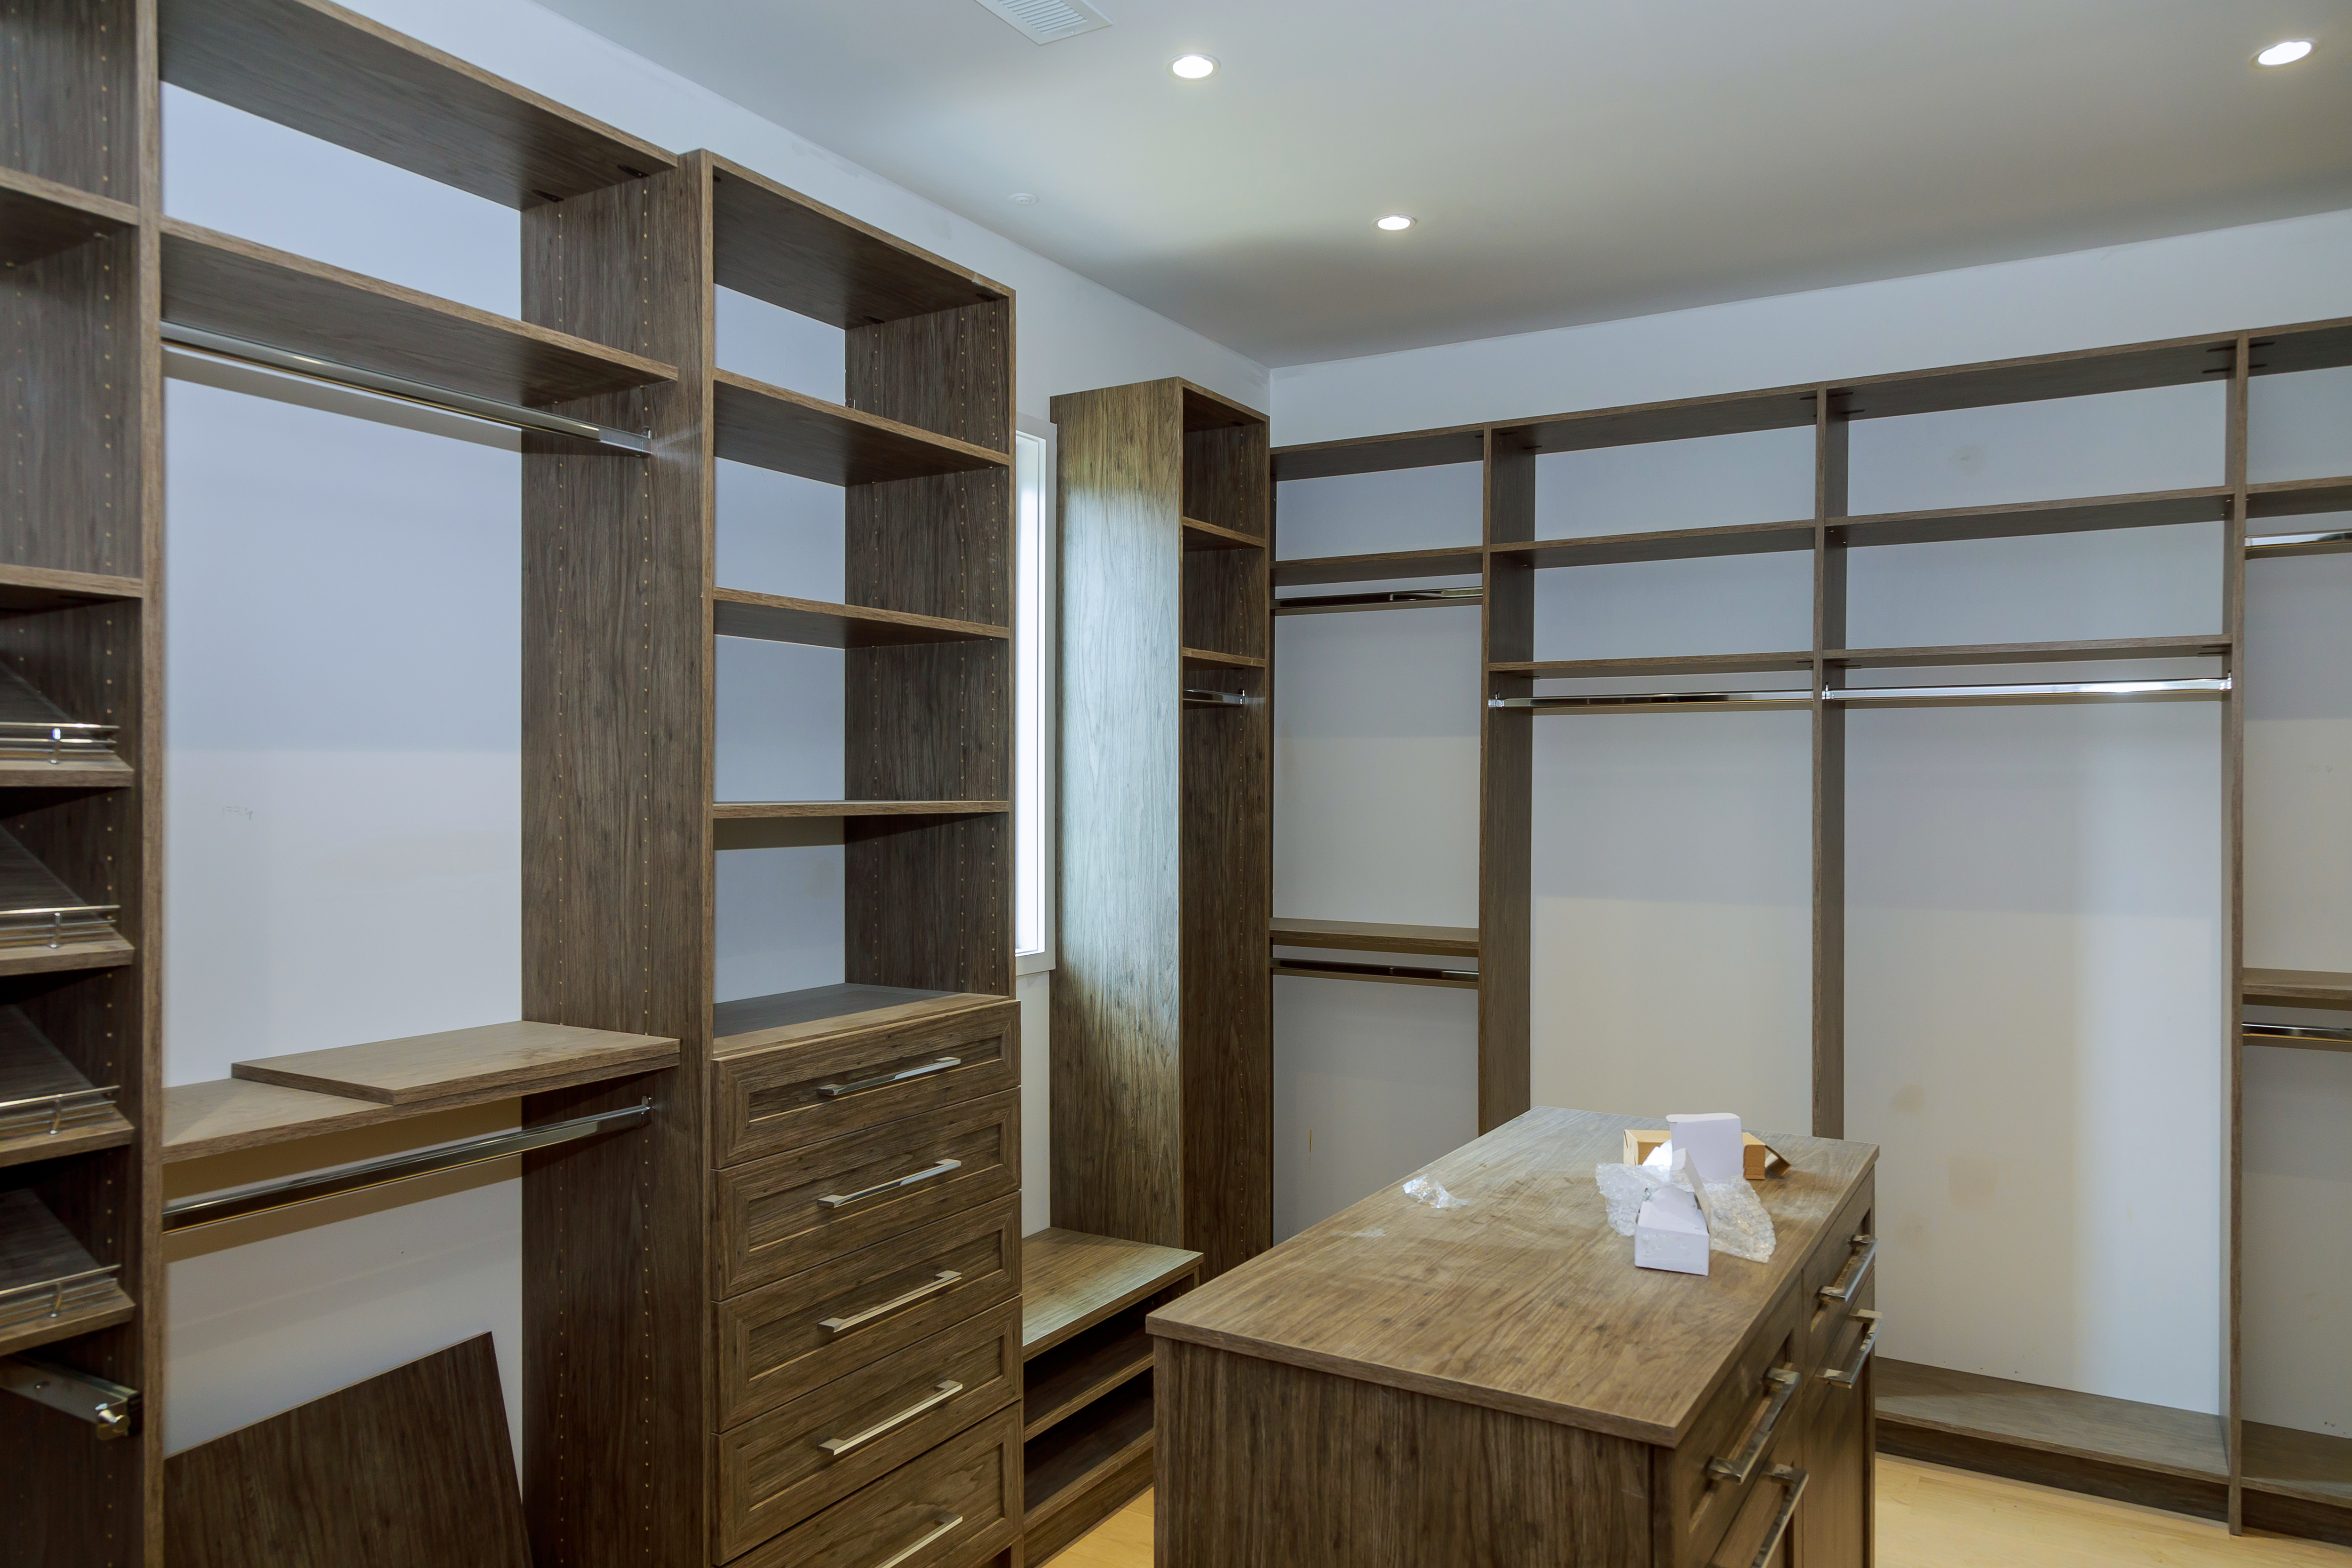 A new closet remodel in dark wood with extra shelving and drawers